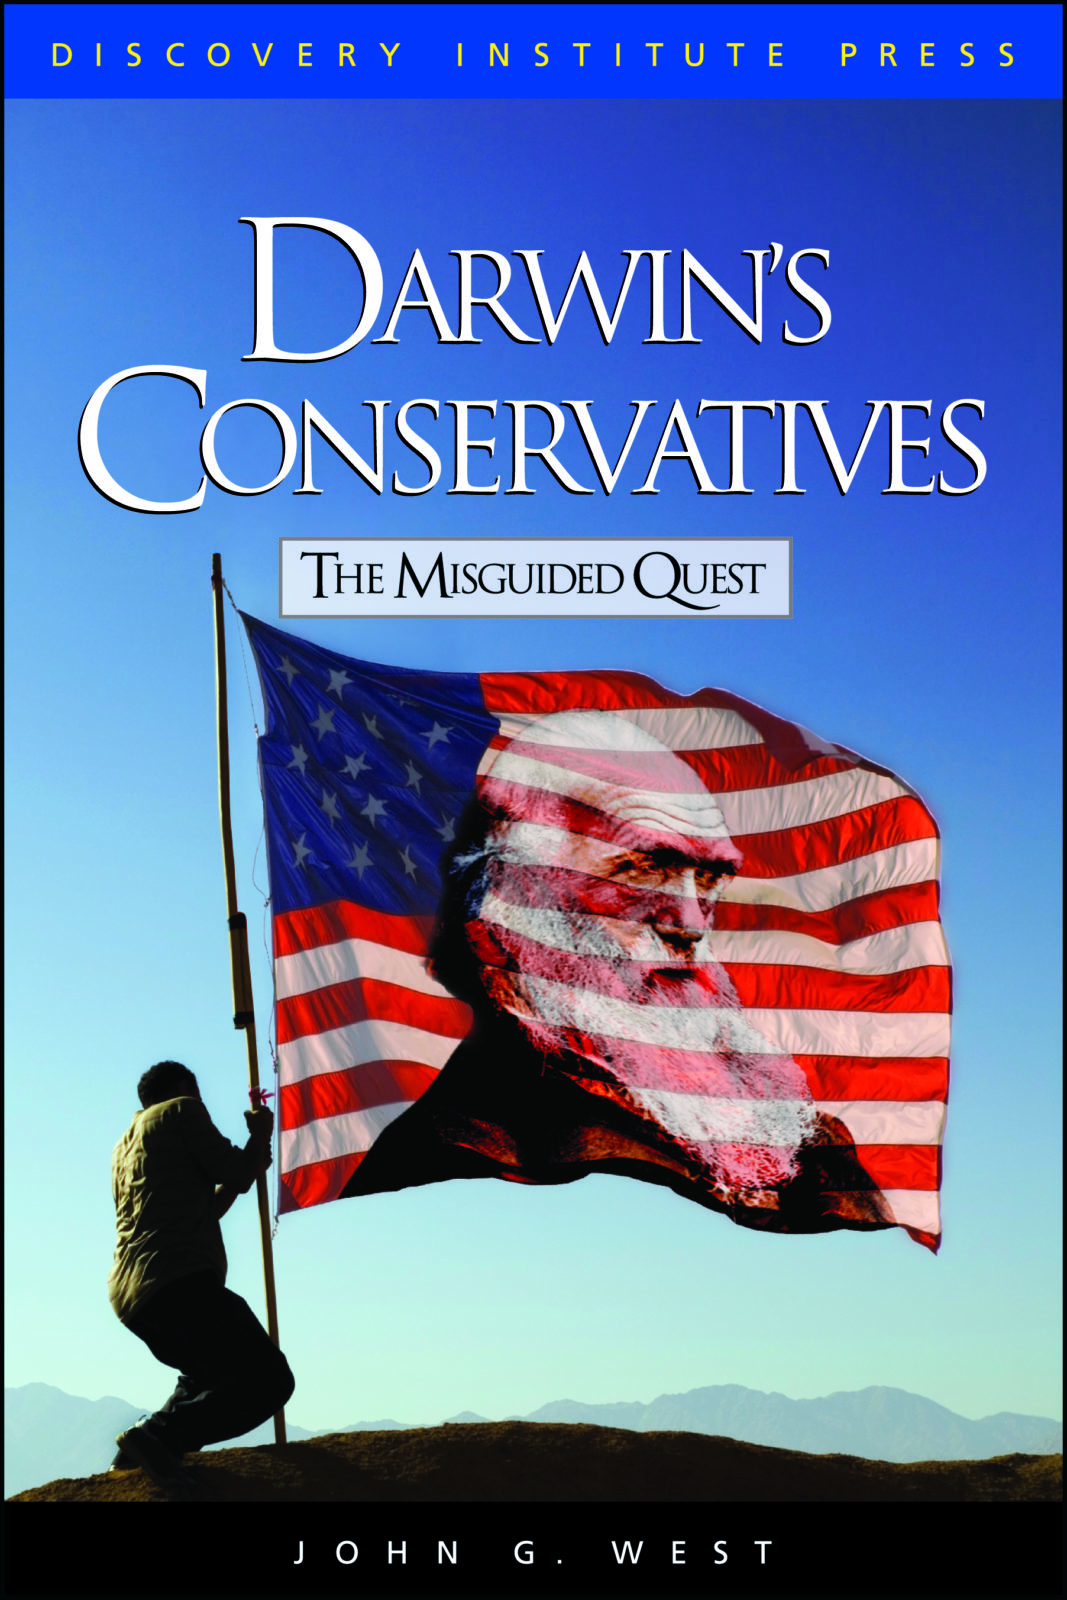 Book cover of Darwin's Conservatives by John G. West